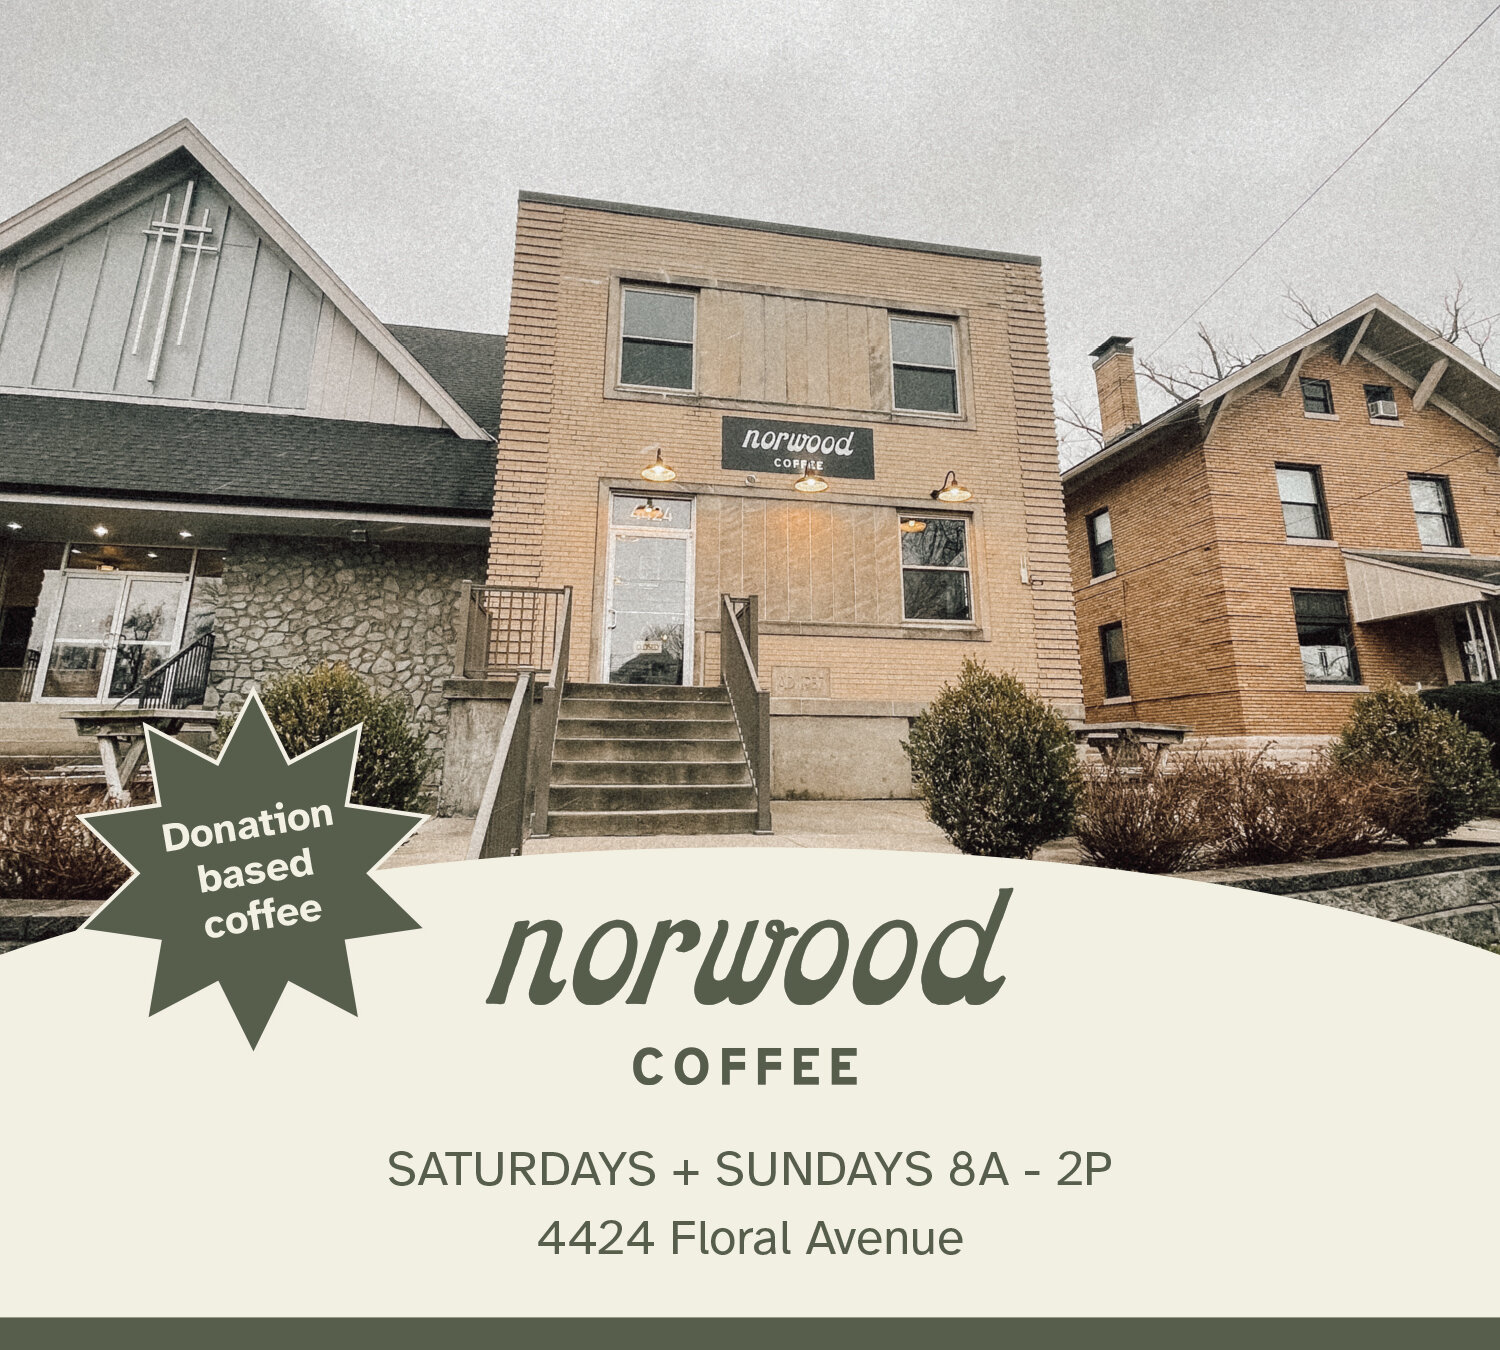 ☕ We'd like to raise a mug to one of our Patsy Program Sponsors, @nrwdcoffee ! Stop into this lovely, donation-based coffee shop in the heart of Norwood on a Saturday or Sunday for some great coffee and community! 

Ya'll know this cabaret runs on ca